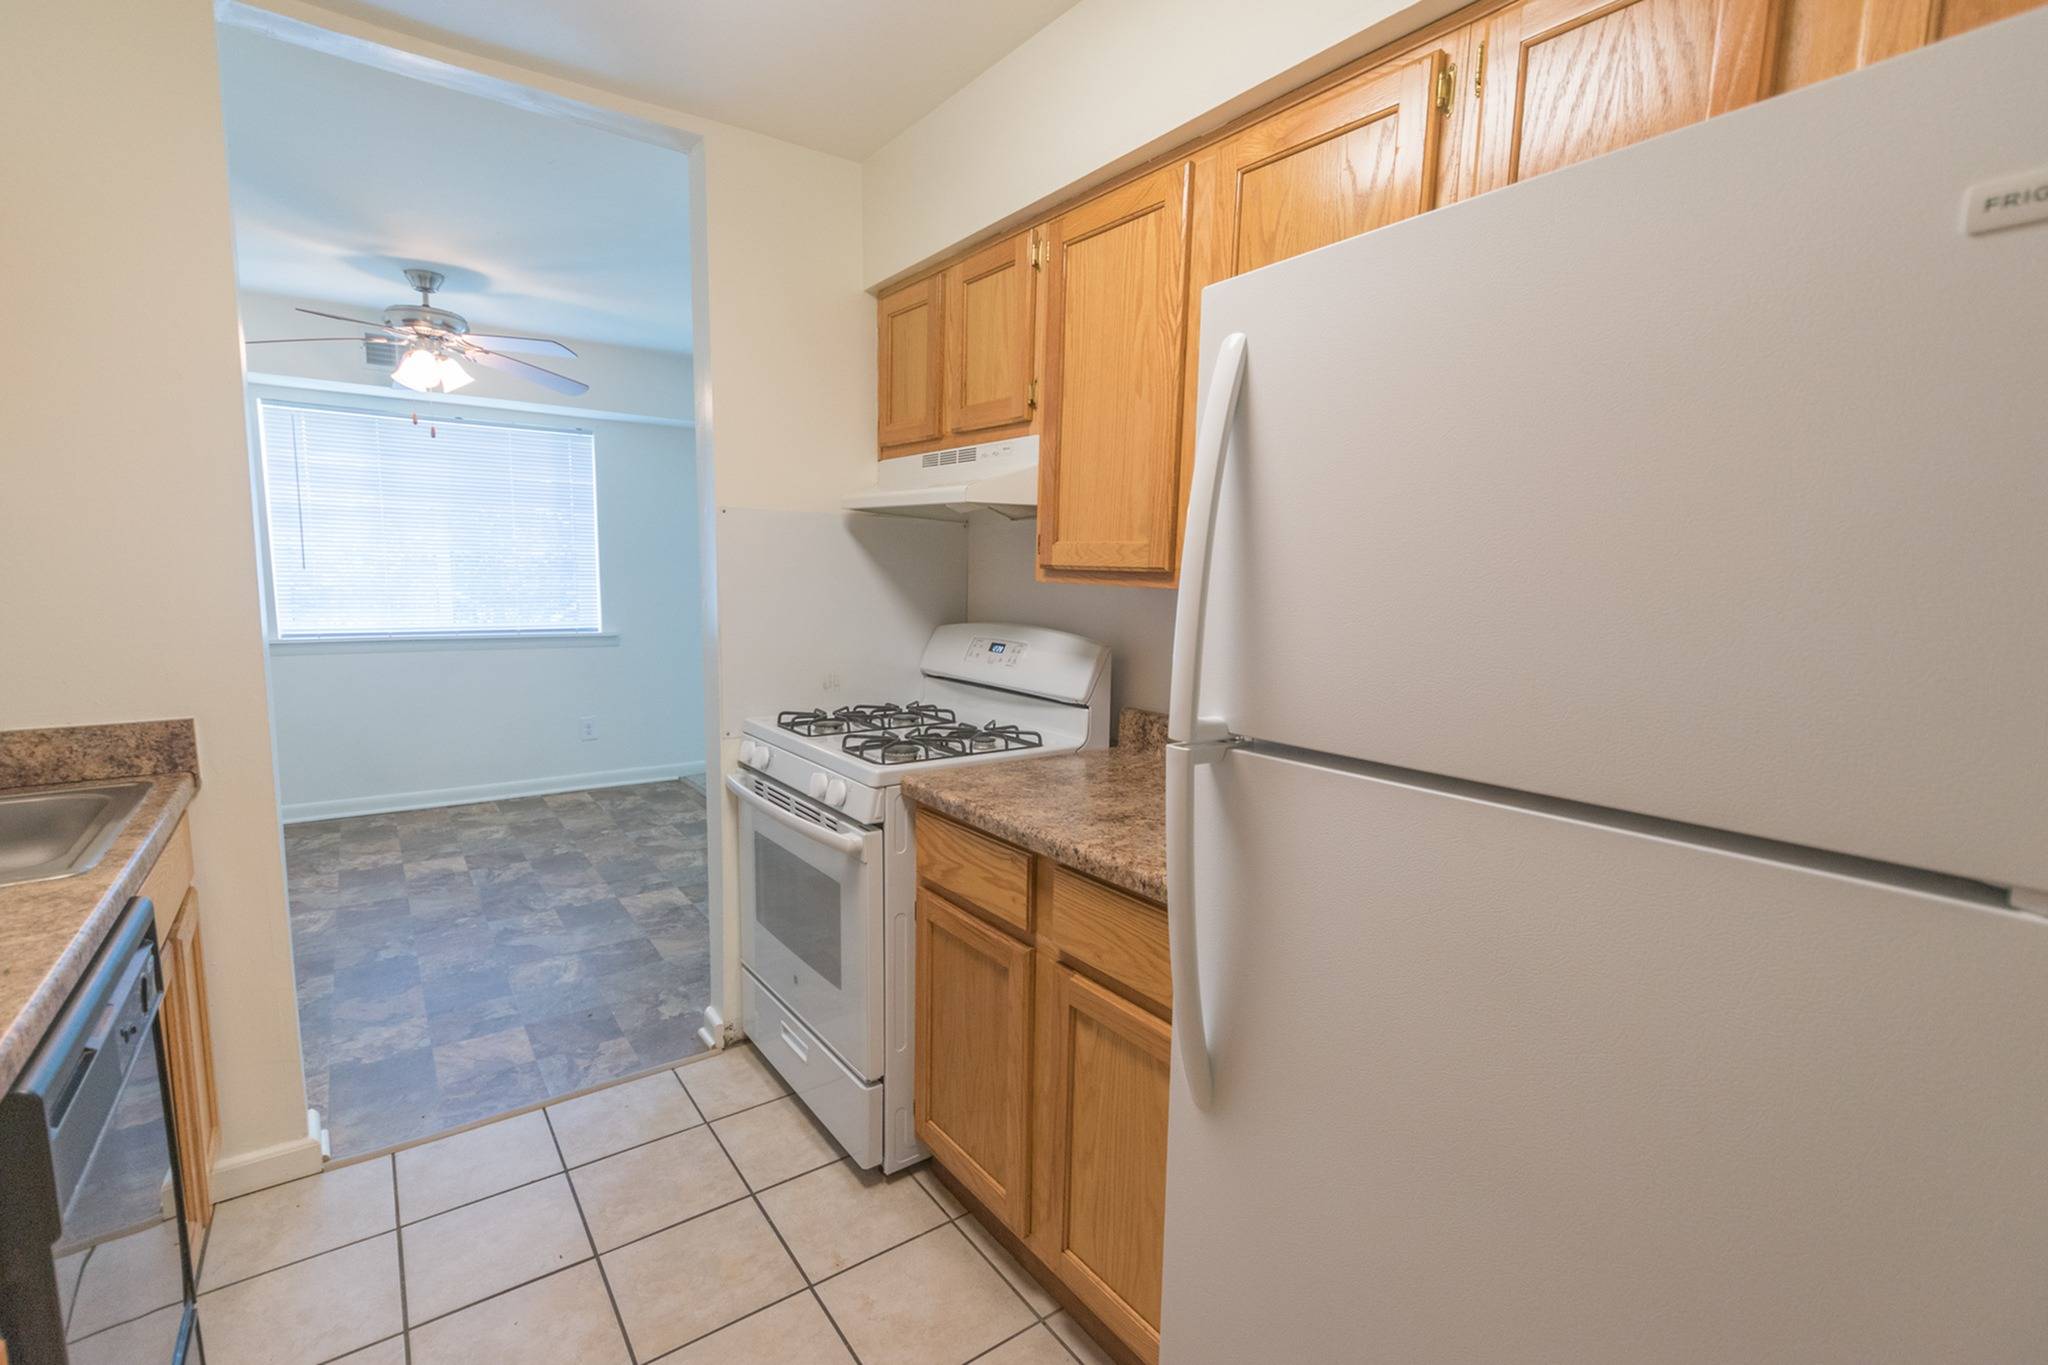 Kitchen area of an apartment, fitted with tiled flooring, spacious cabinets, and a stove